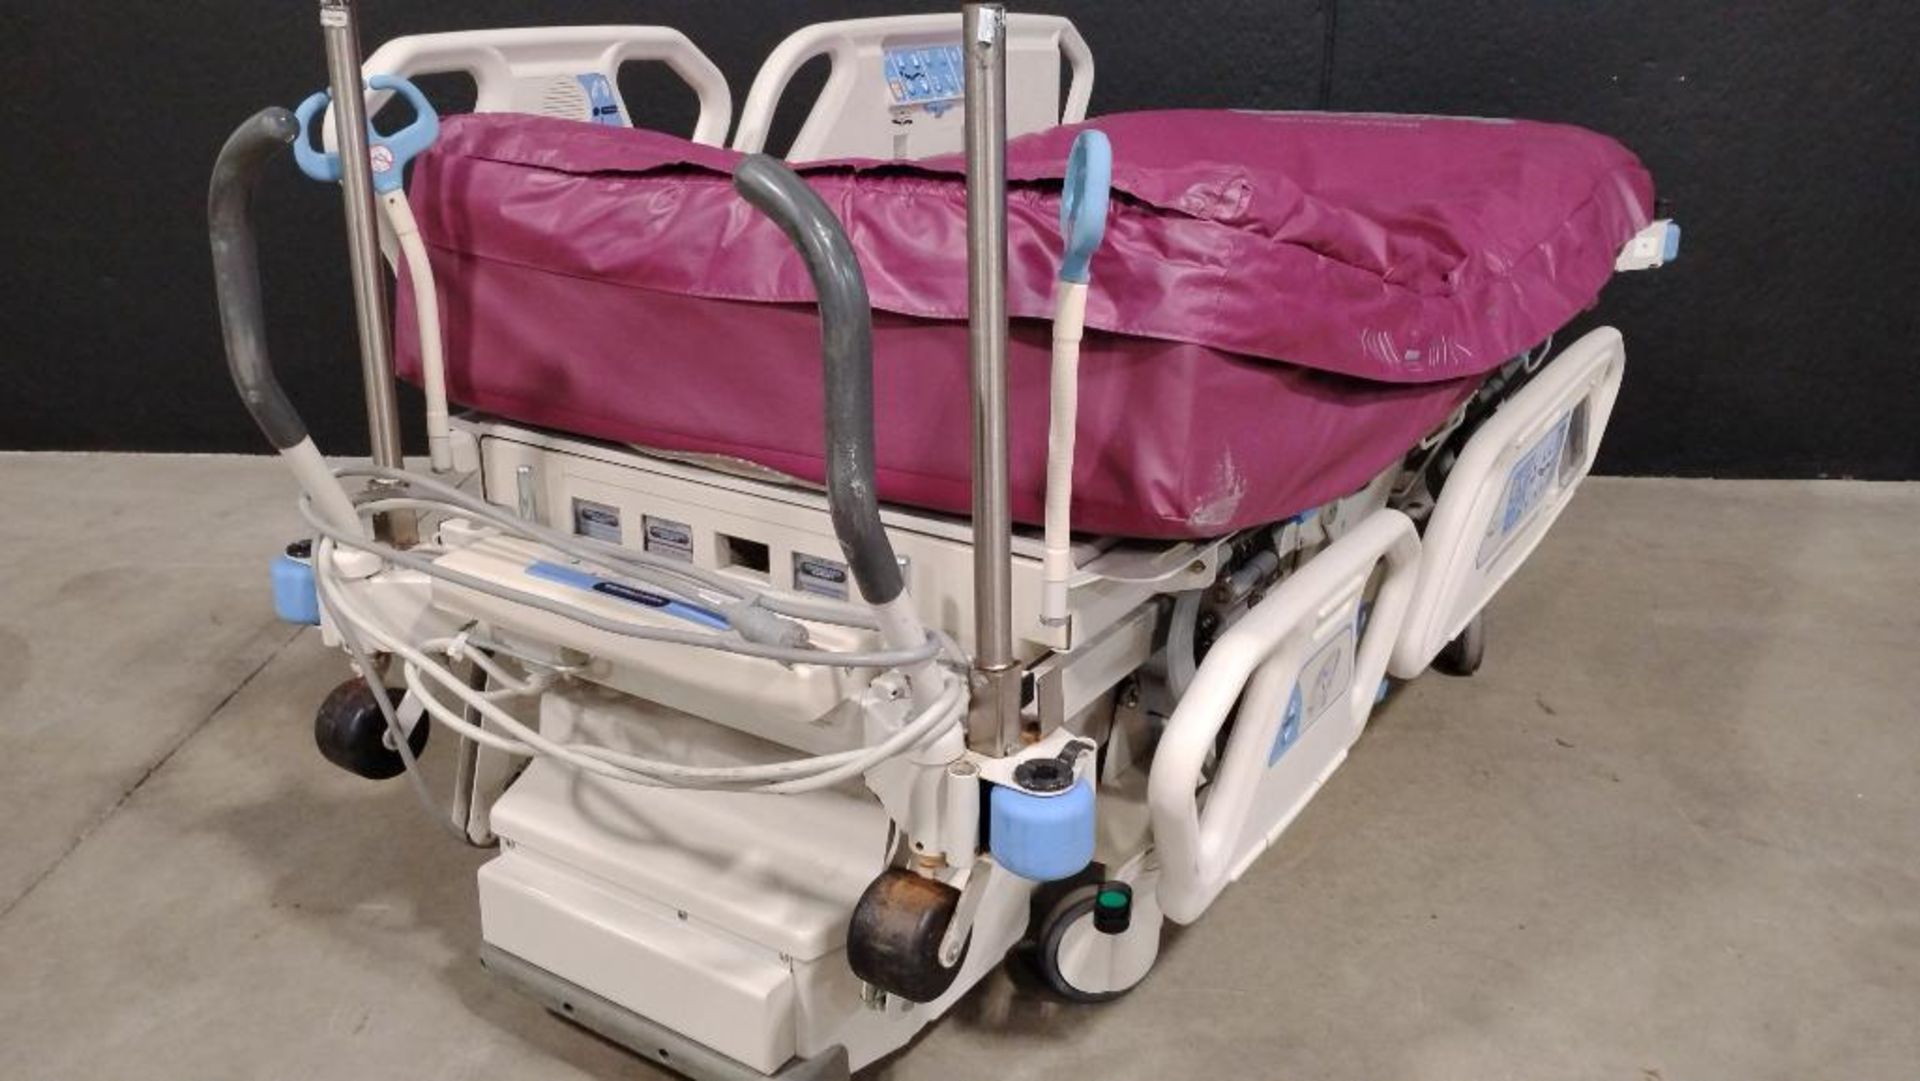 HILL-ROM TOTAL CARE SPORT 2 P1900 HOSPITAL BED - Image 3 of 3